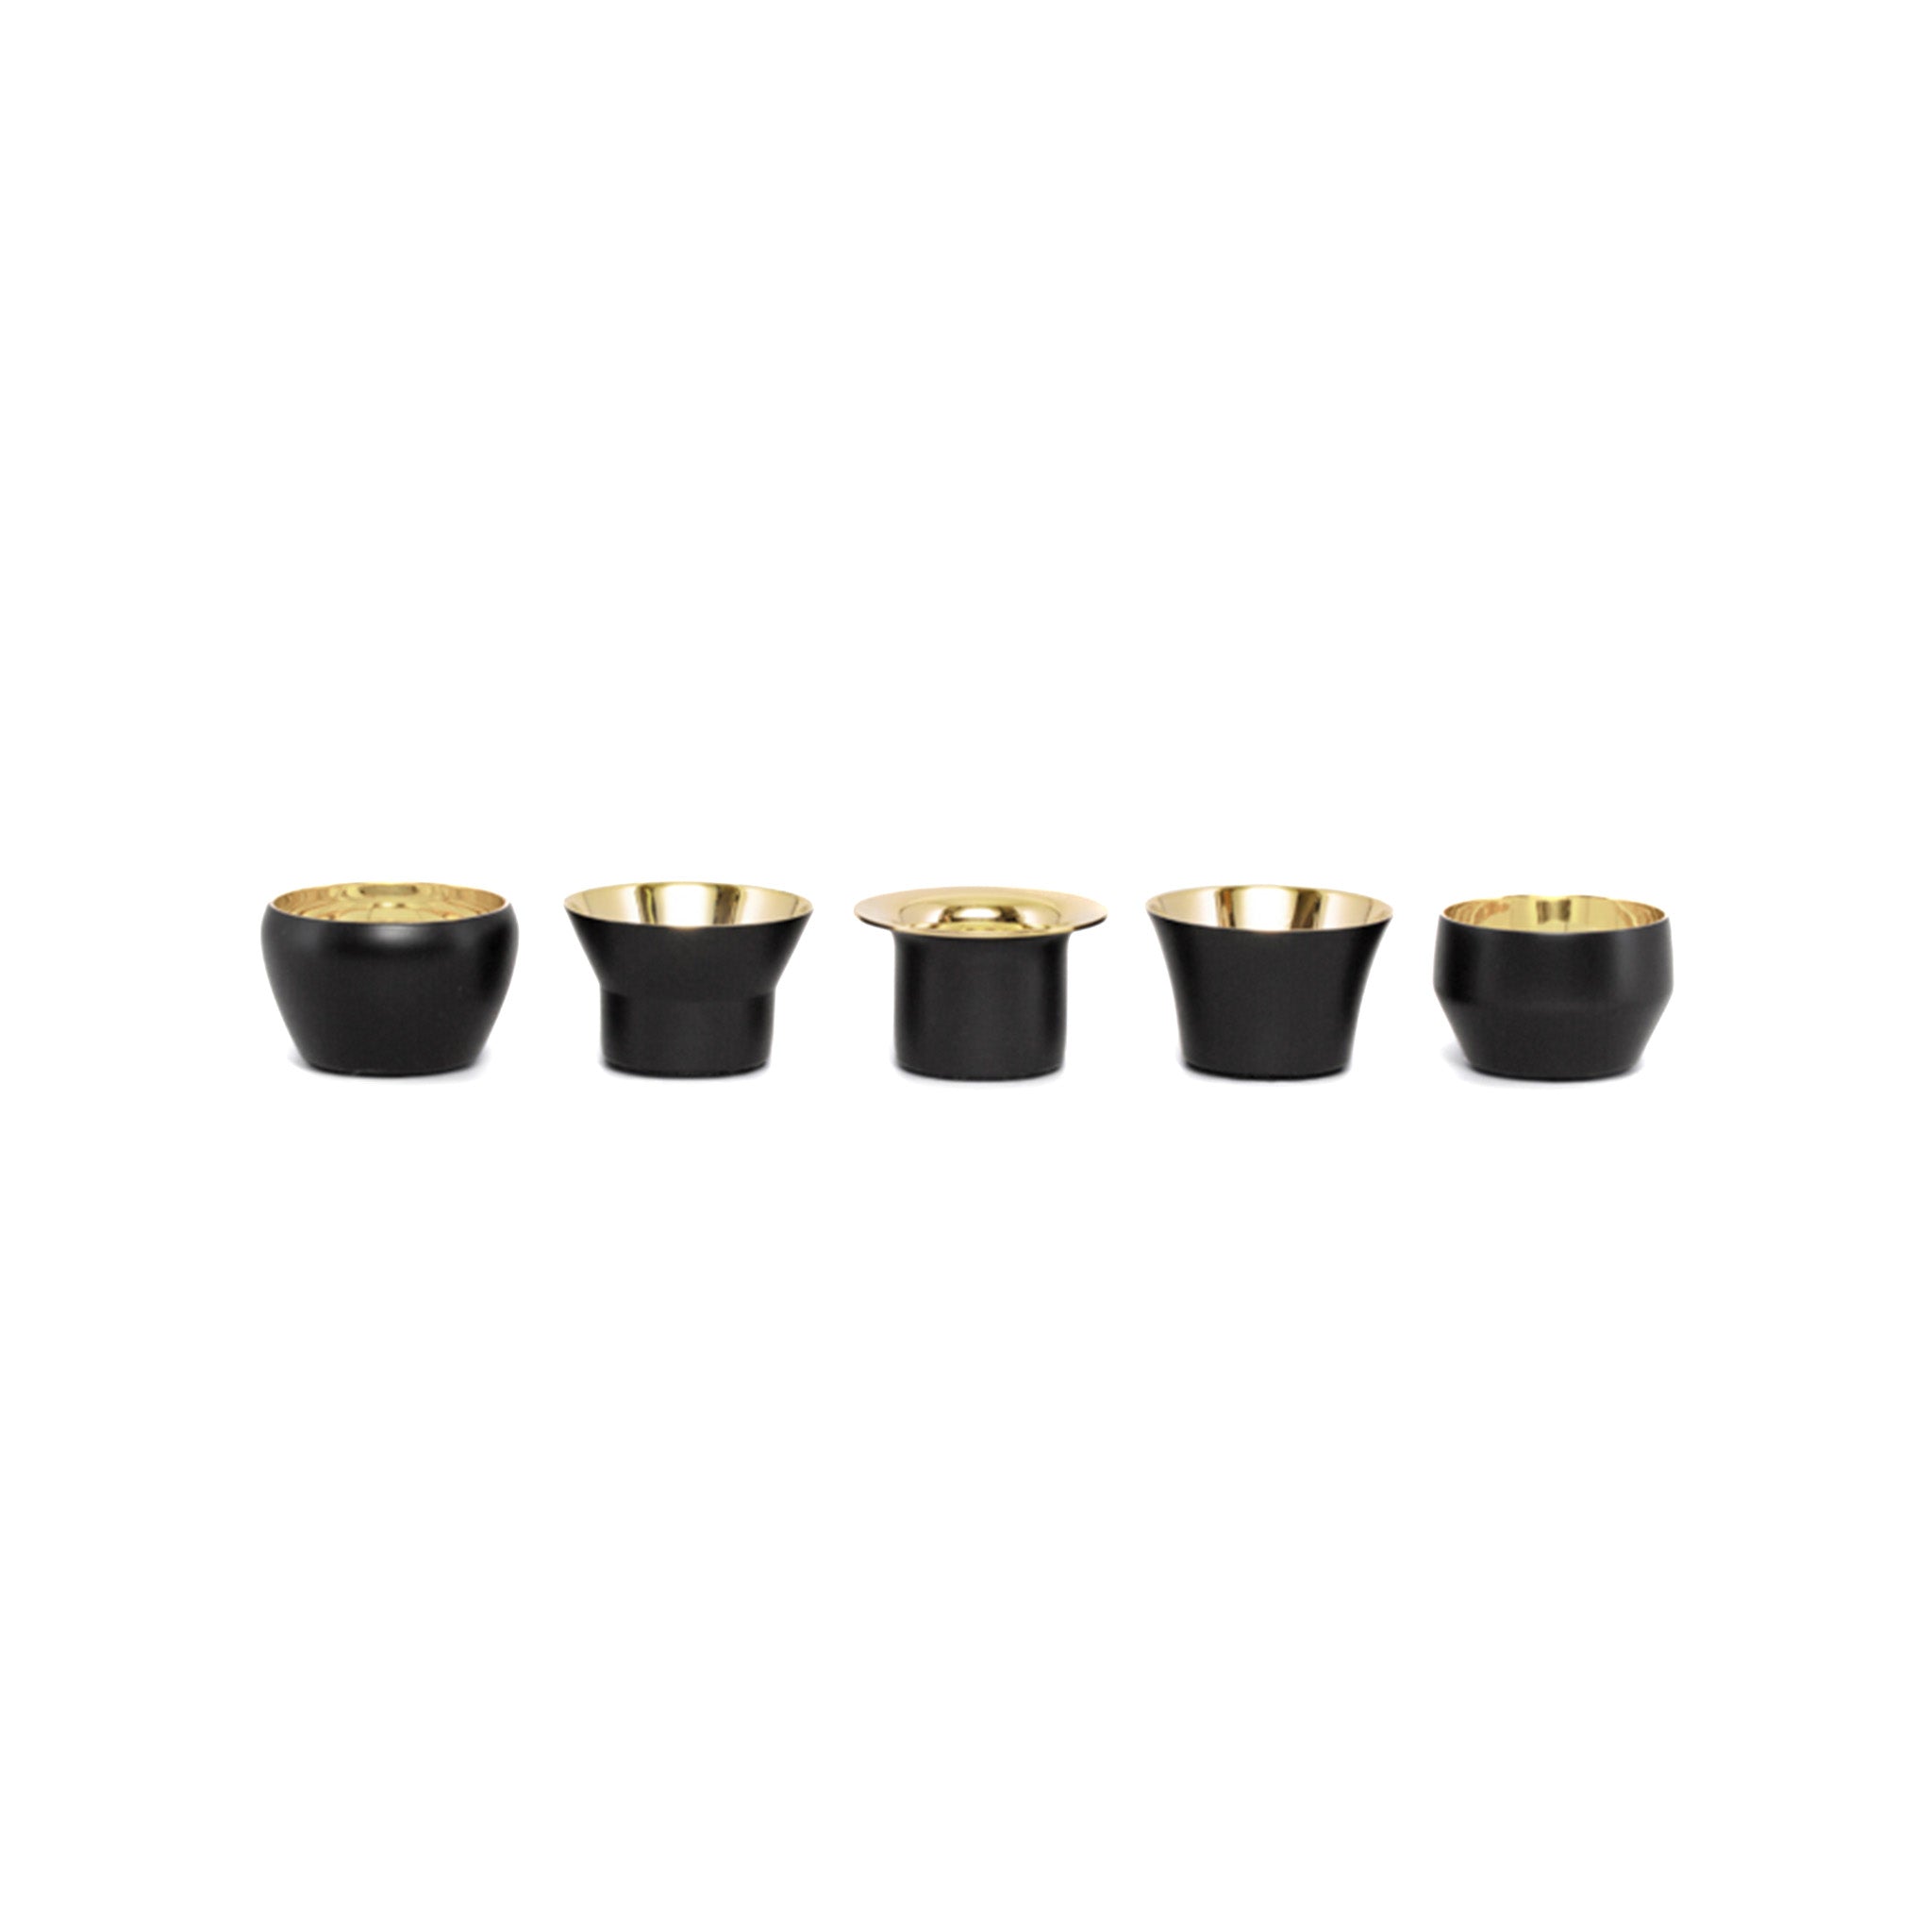 a set of five black and gold tealights